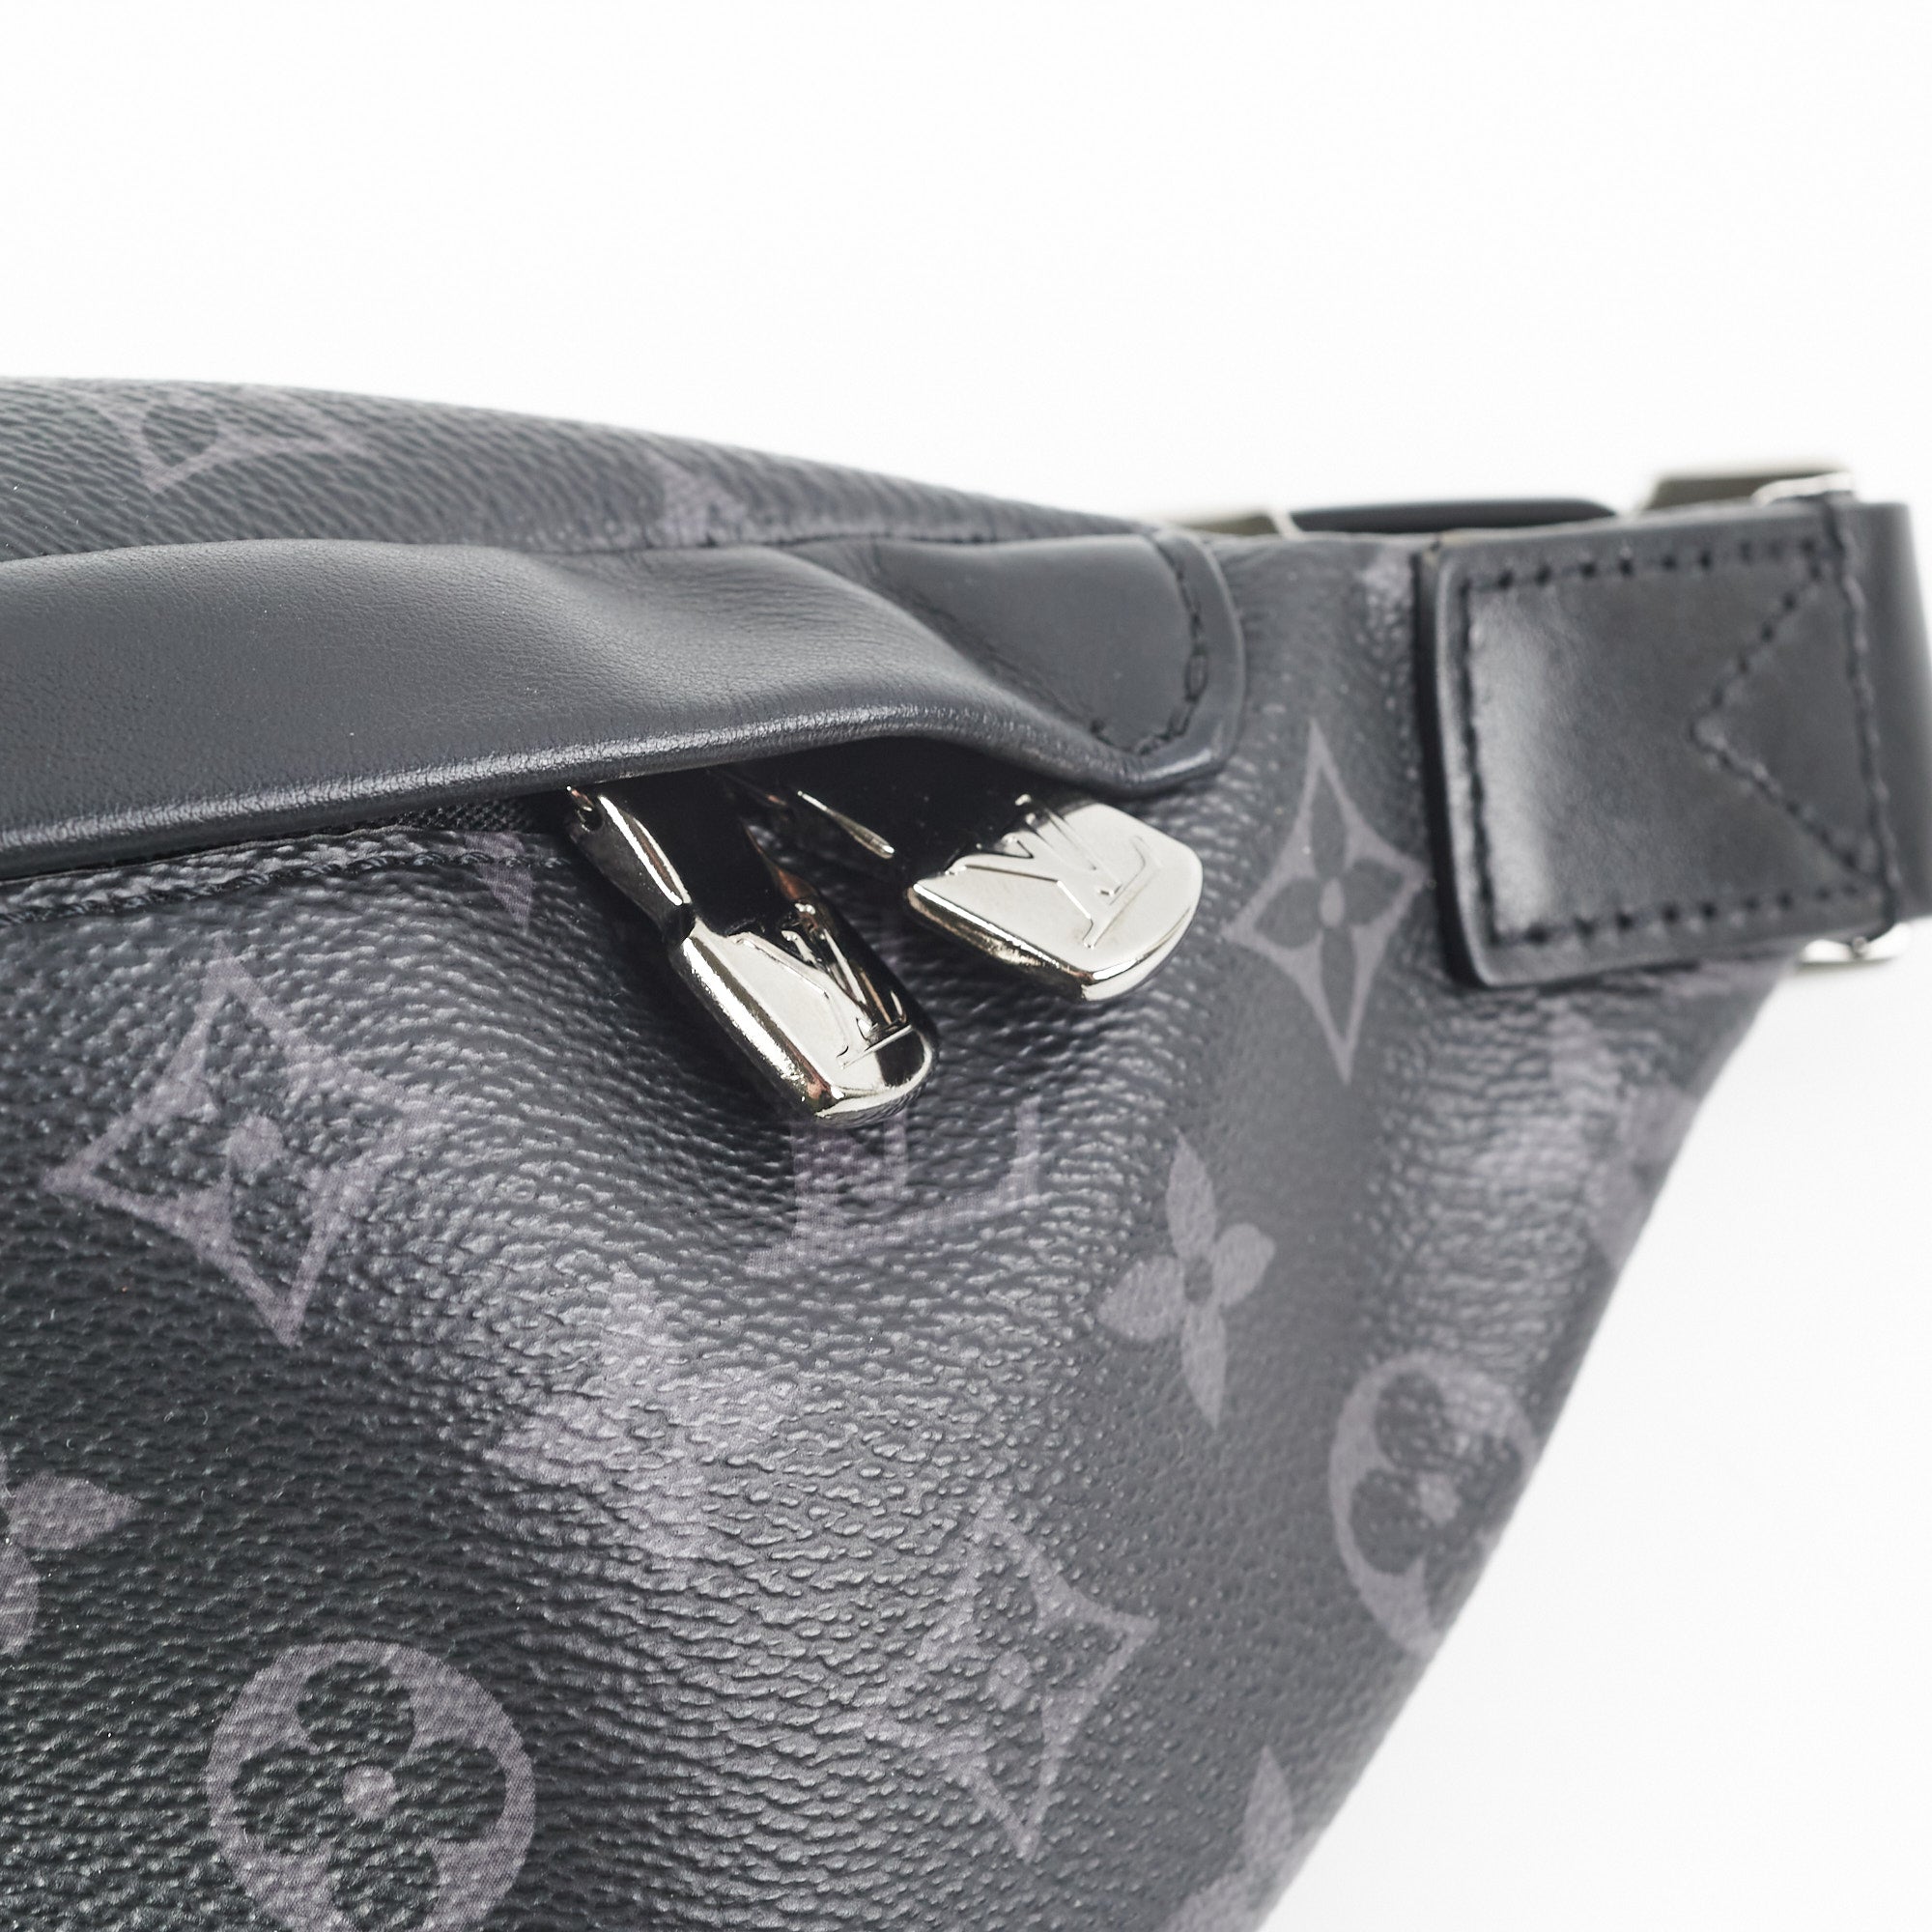 Shop Louis Vuitton Discovery Discovery bumbag pm (M46035) by Monticello